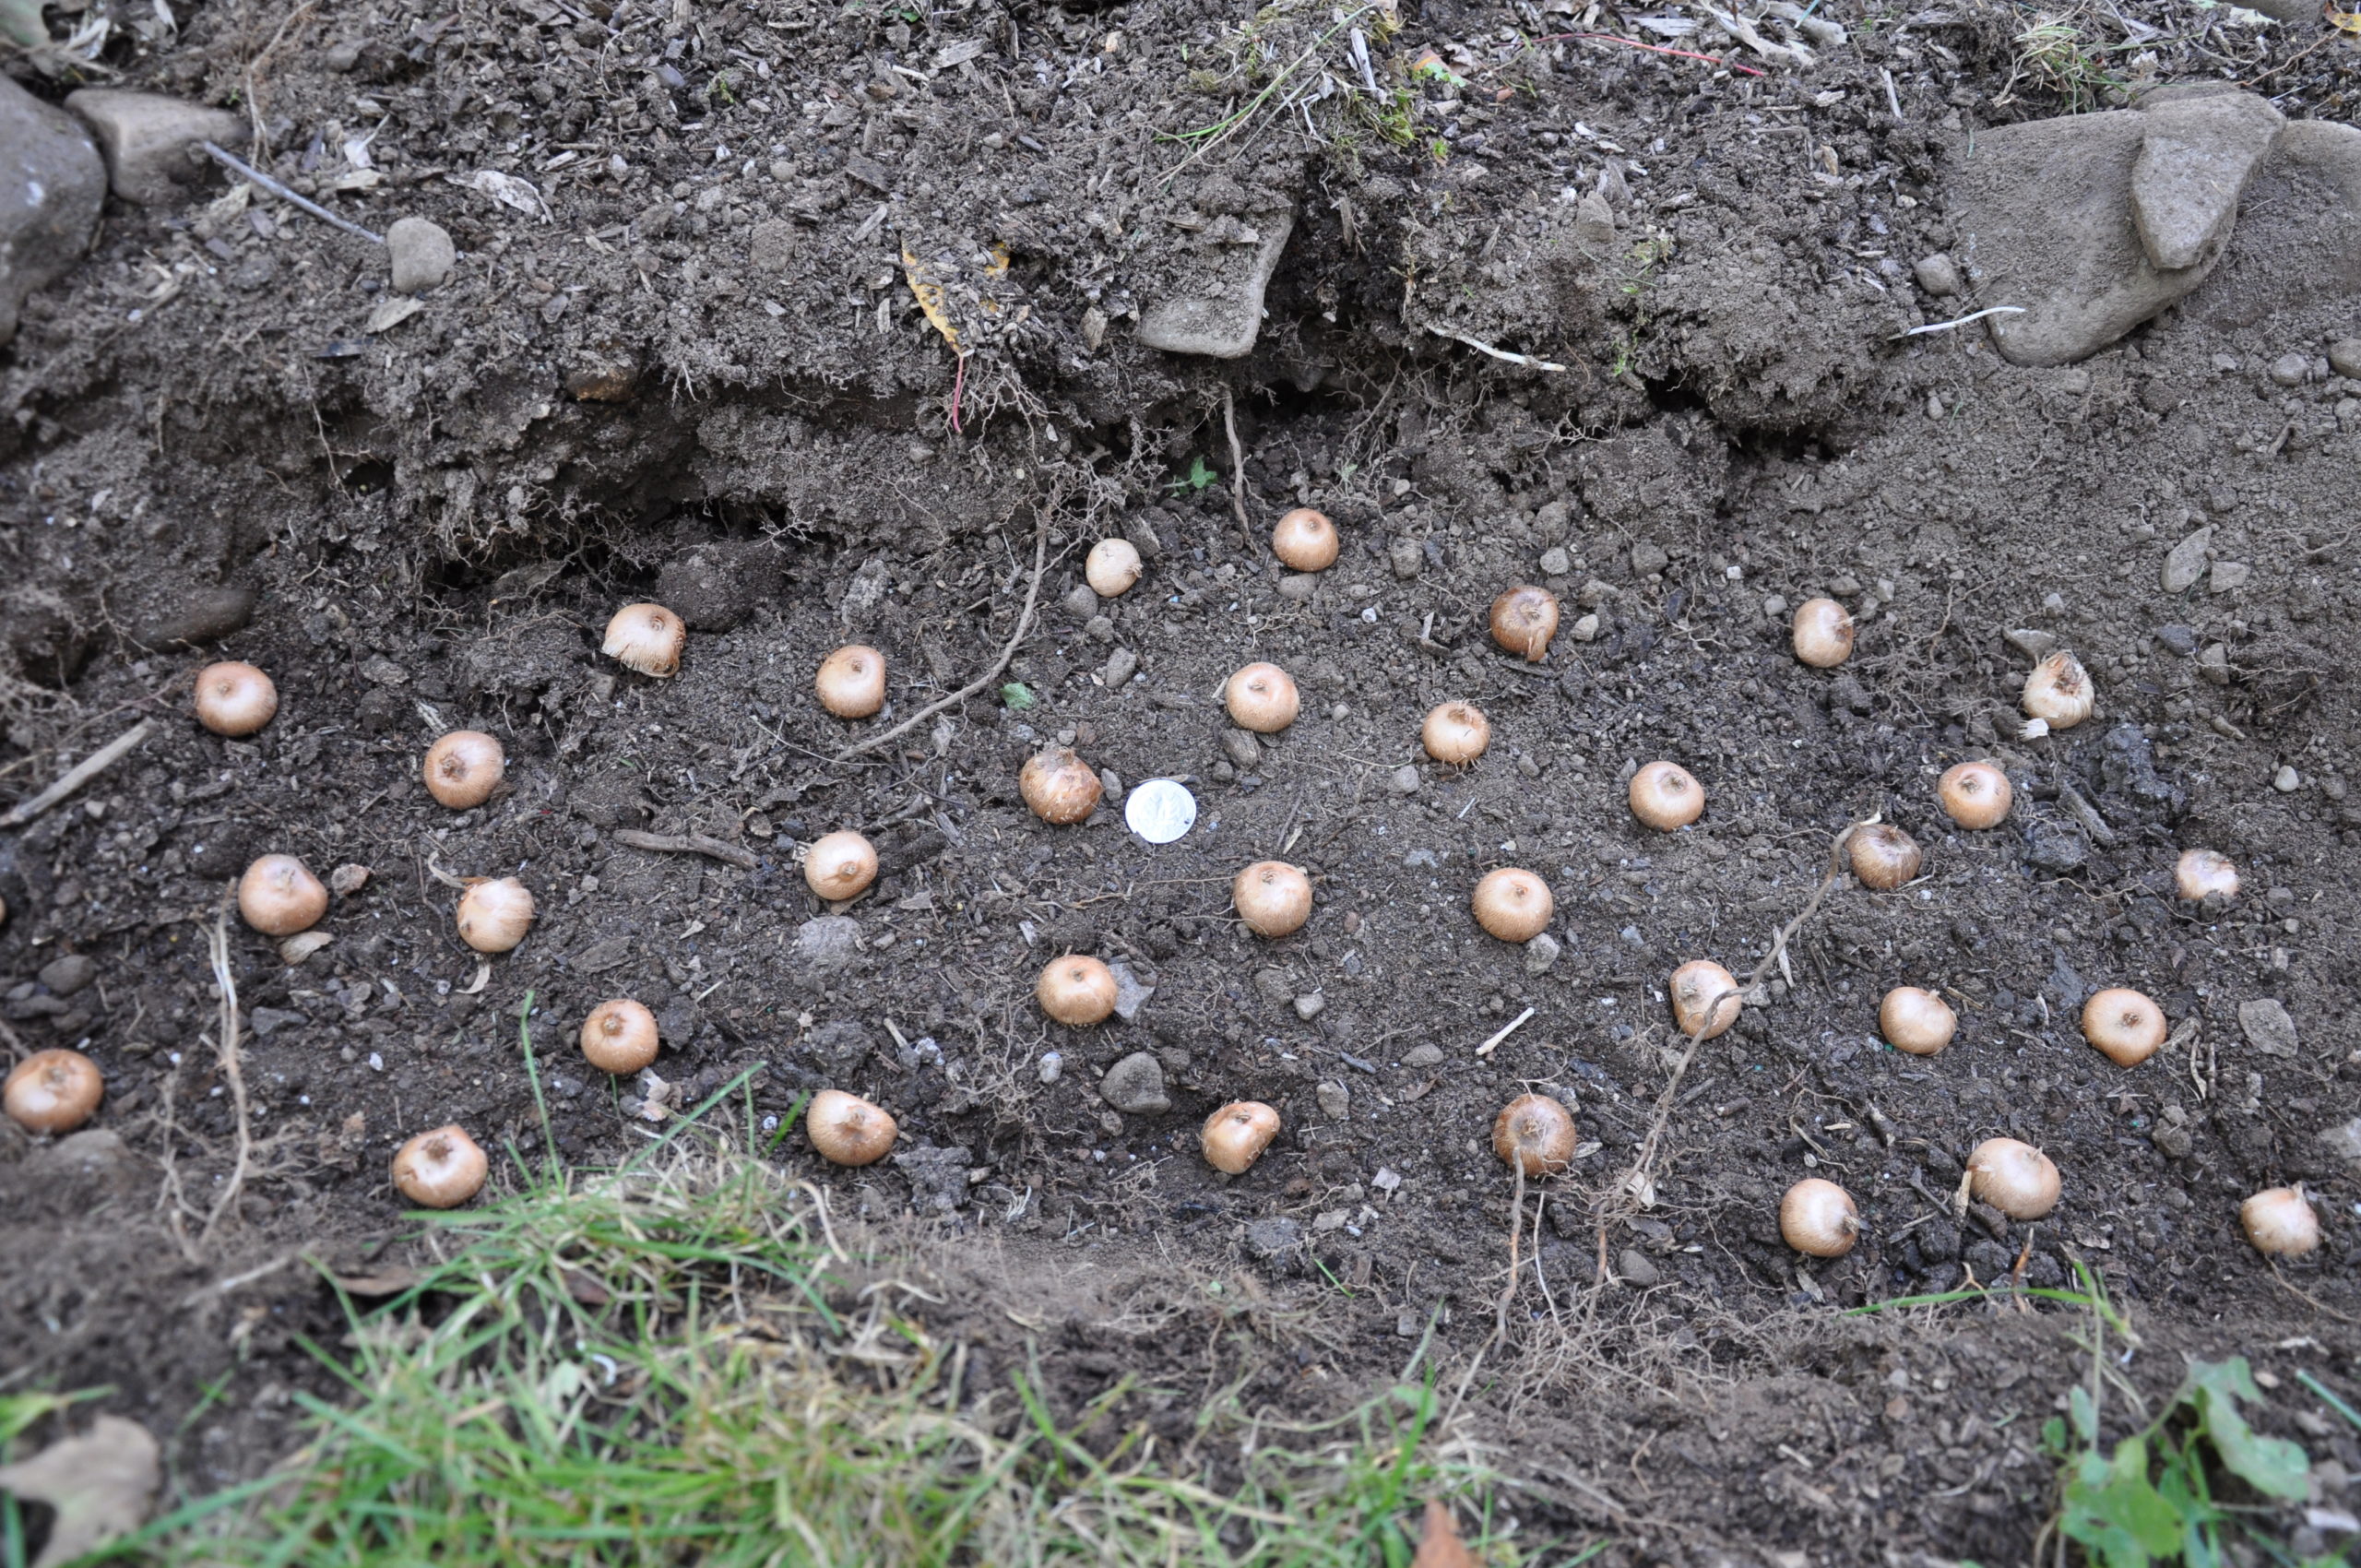 With the sod “peeled” back, the crocus bulbs are laid out. A small amount of soil can be used as backfill, then the sod is simply laid back over the bulbs.